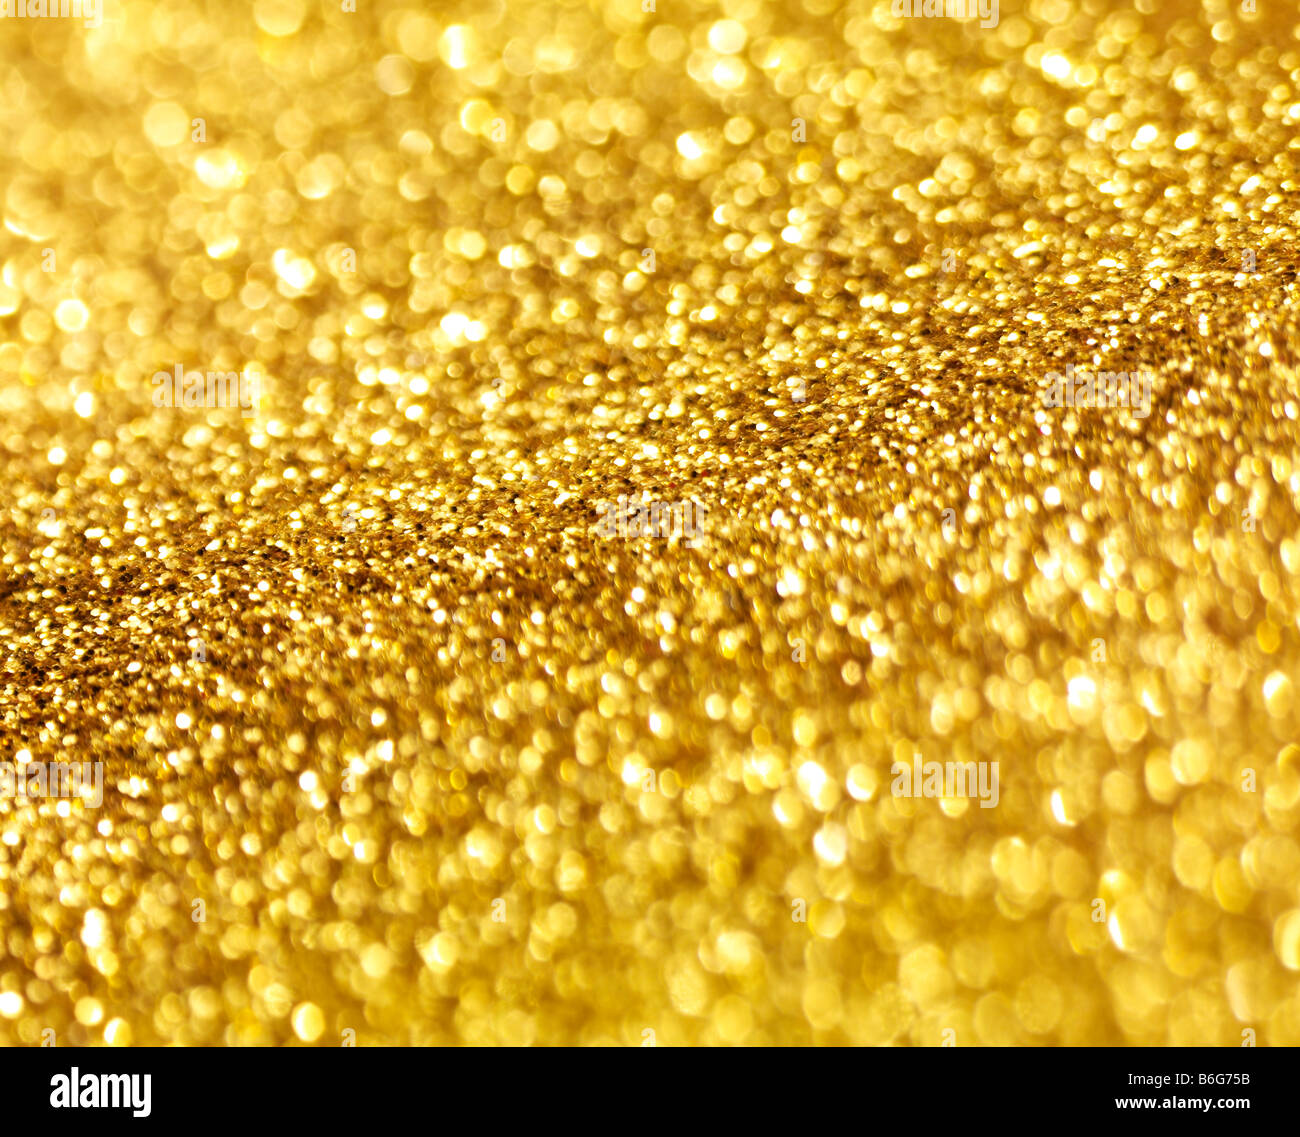 gold sparkly background short depth of field blurry sharp Stock Photo